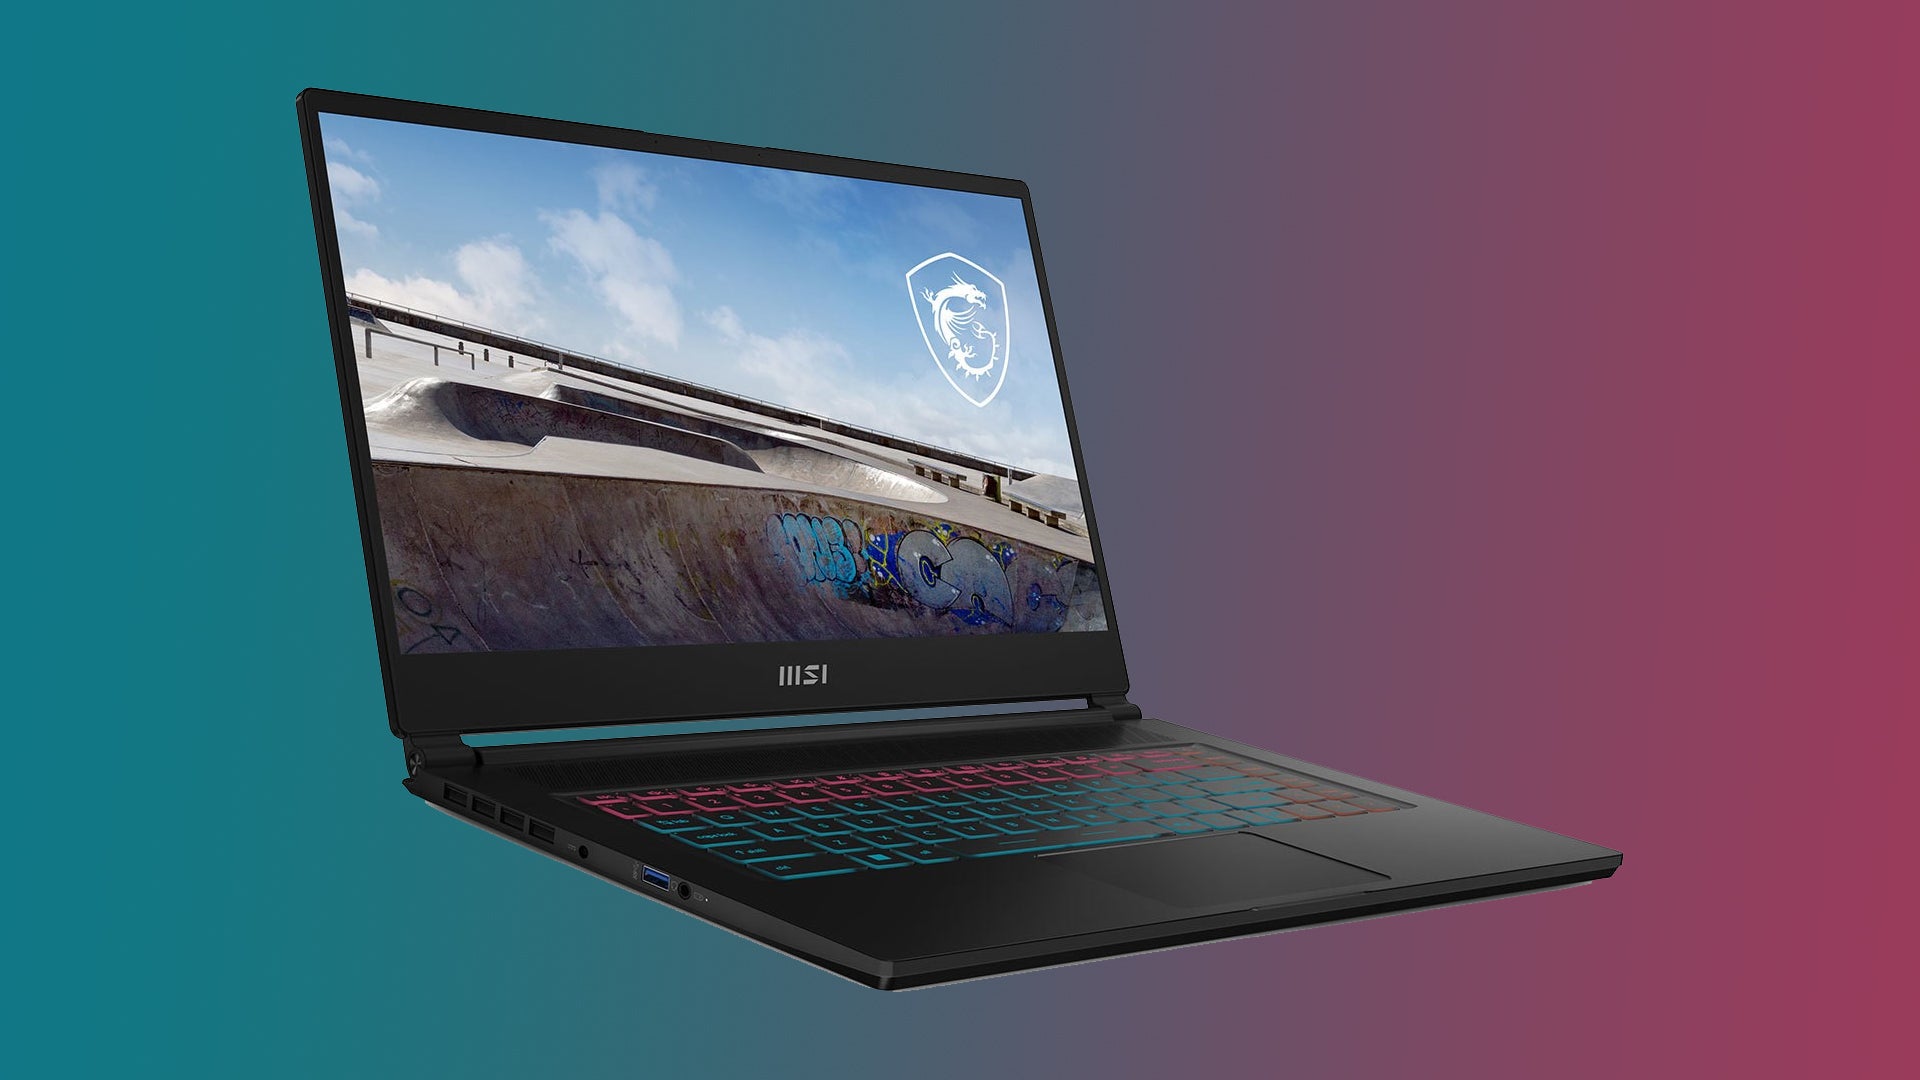 Image of an MSI Stealth 15 laptop on a blue to red gradient background.